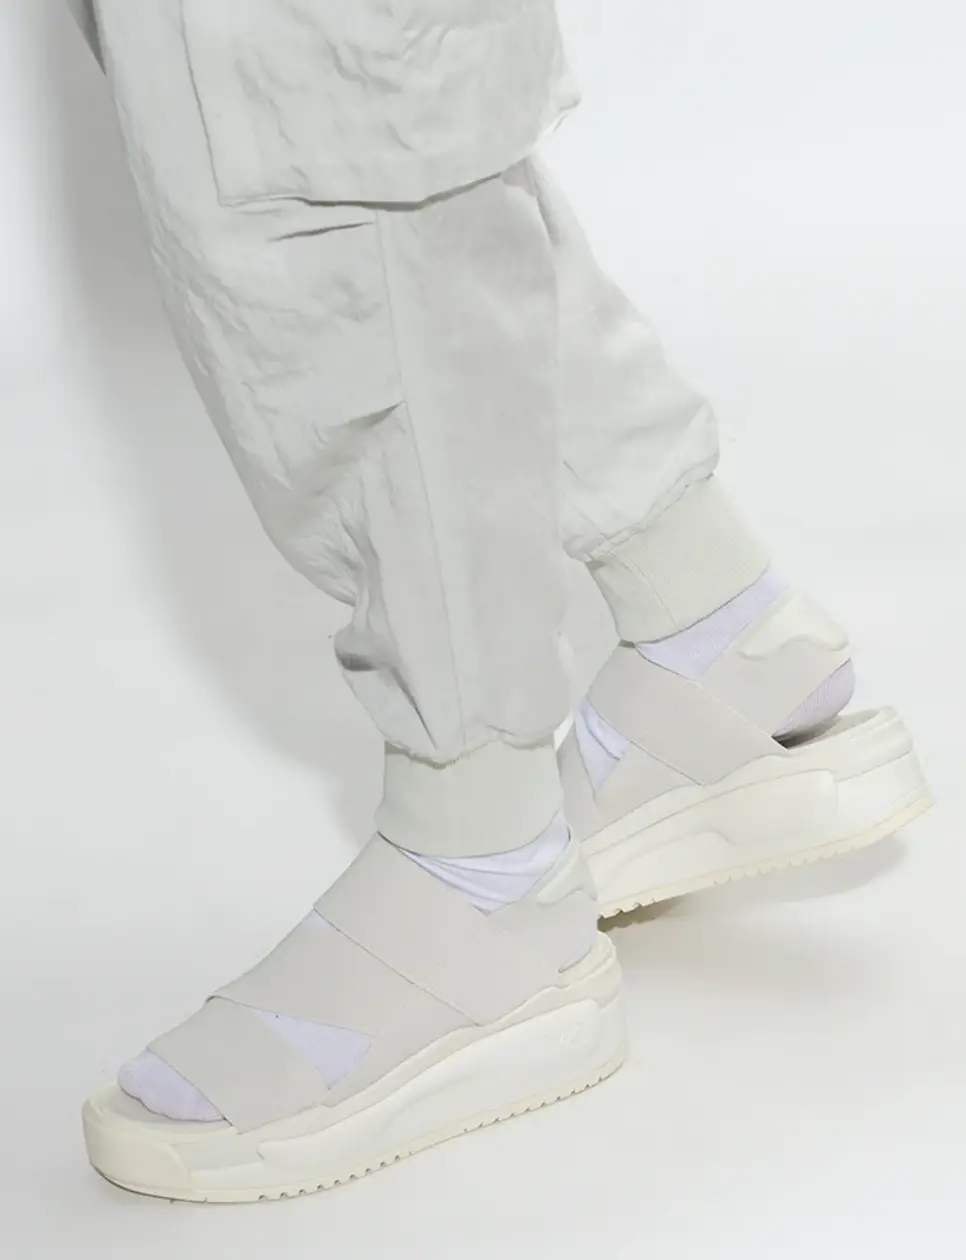 Y3 Rivalry Sandals Slip On Off White